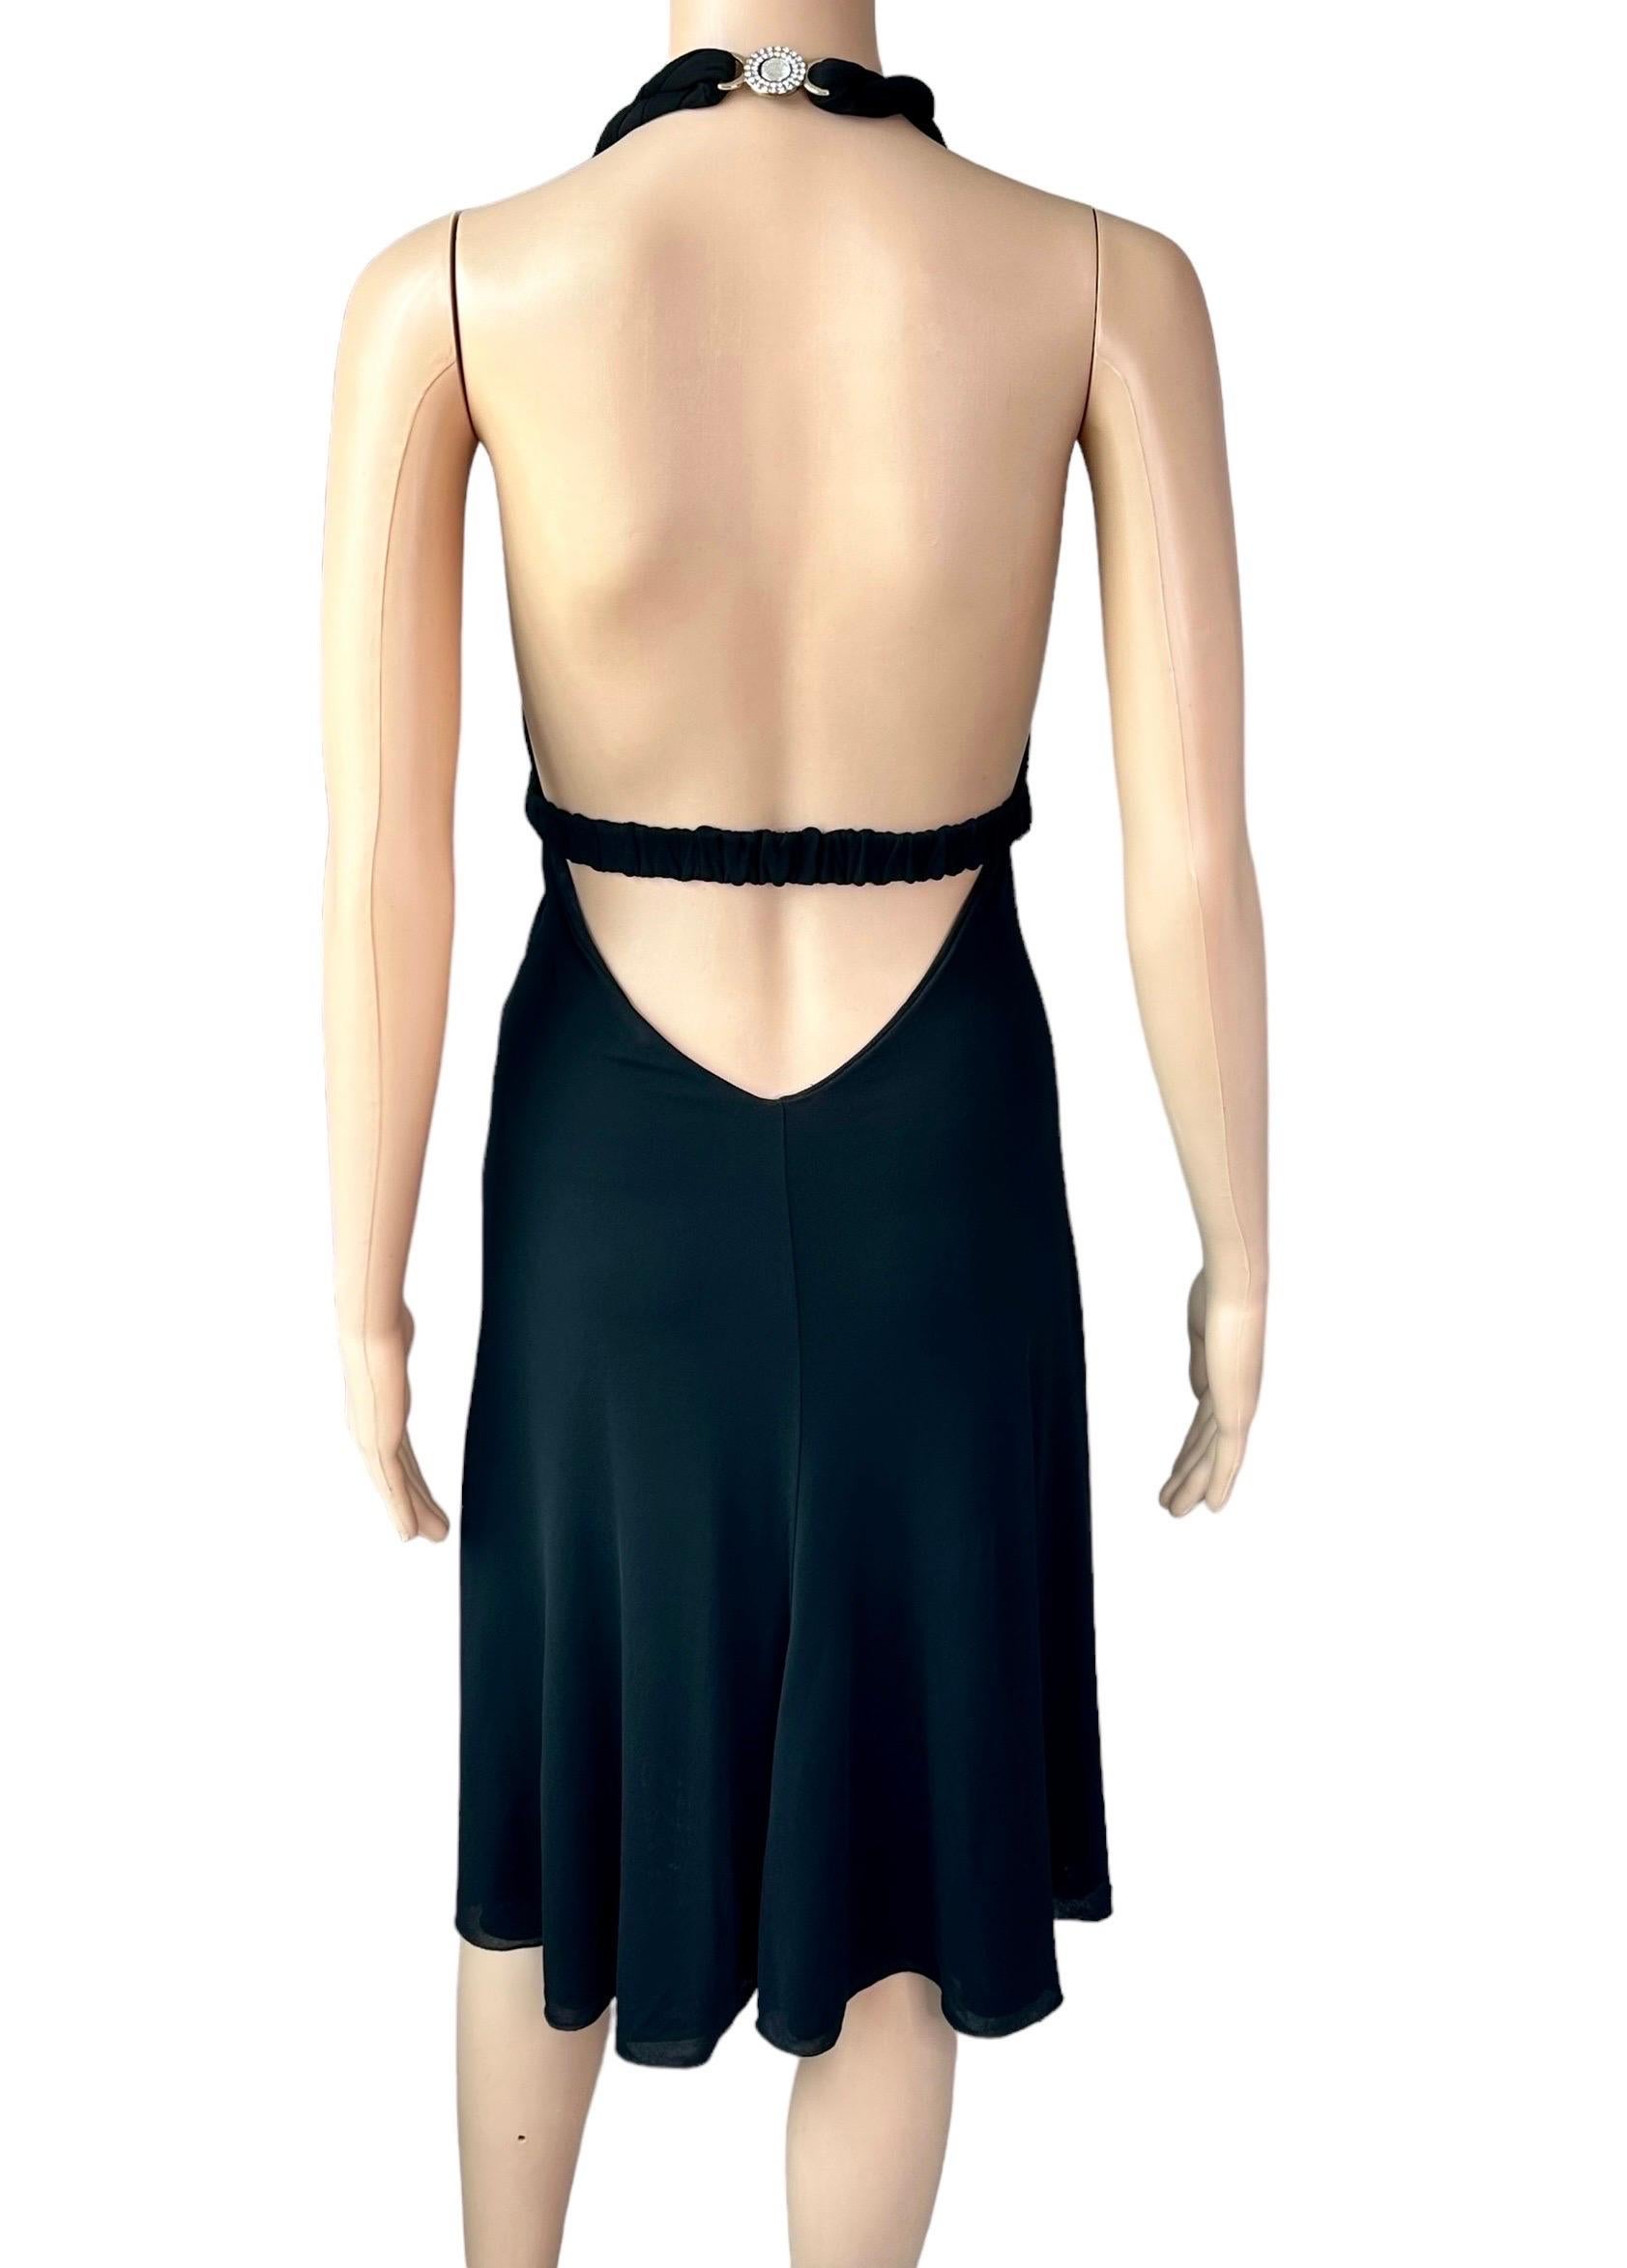 Versace S/S 2007 Crystal Logo Plunging Neckline Backless Halter Black Dress In New Condition For Sale In Naples, FL